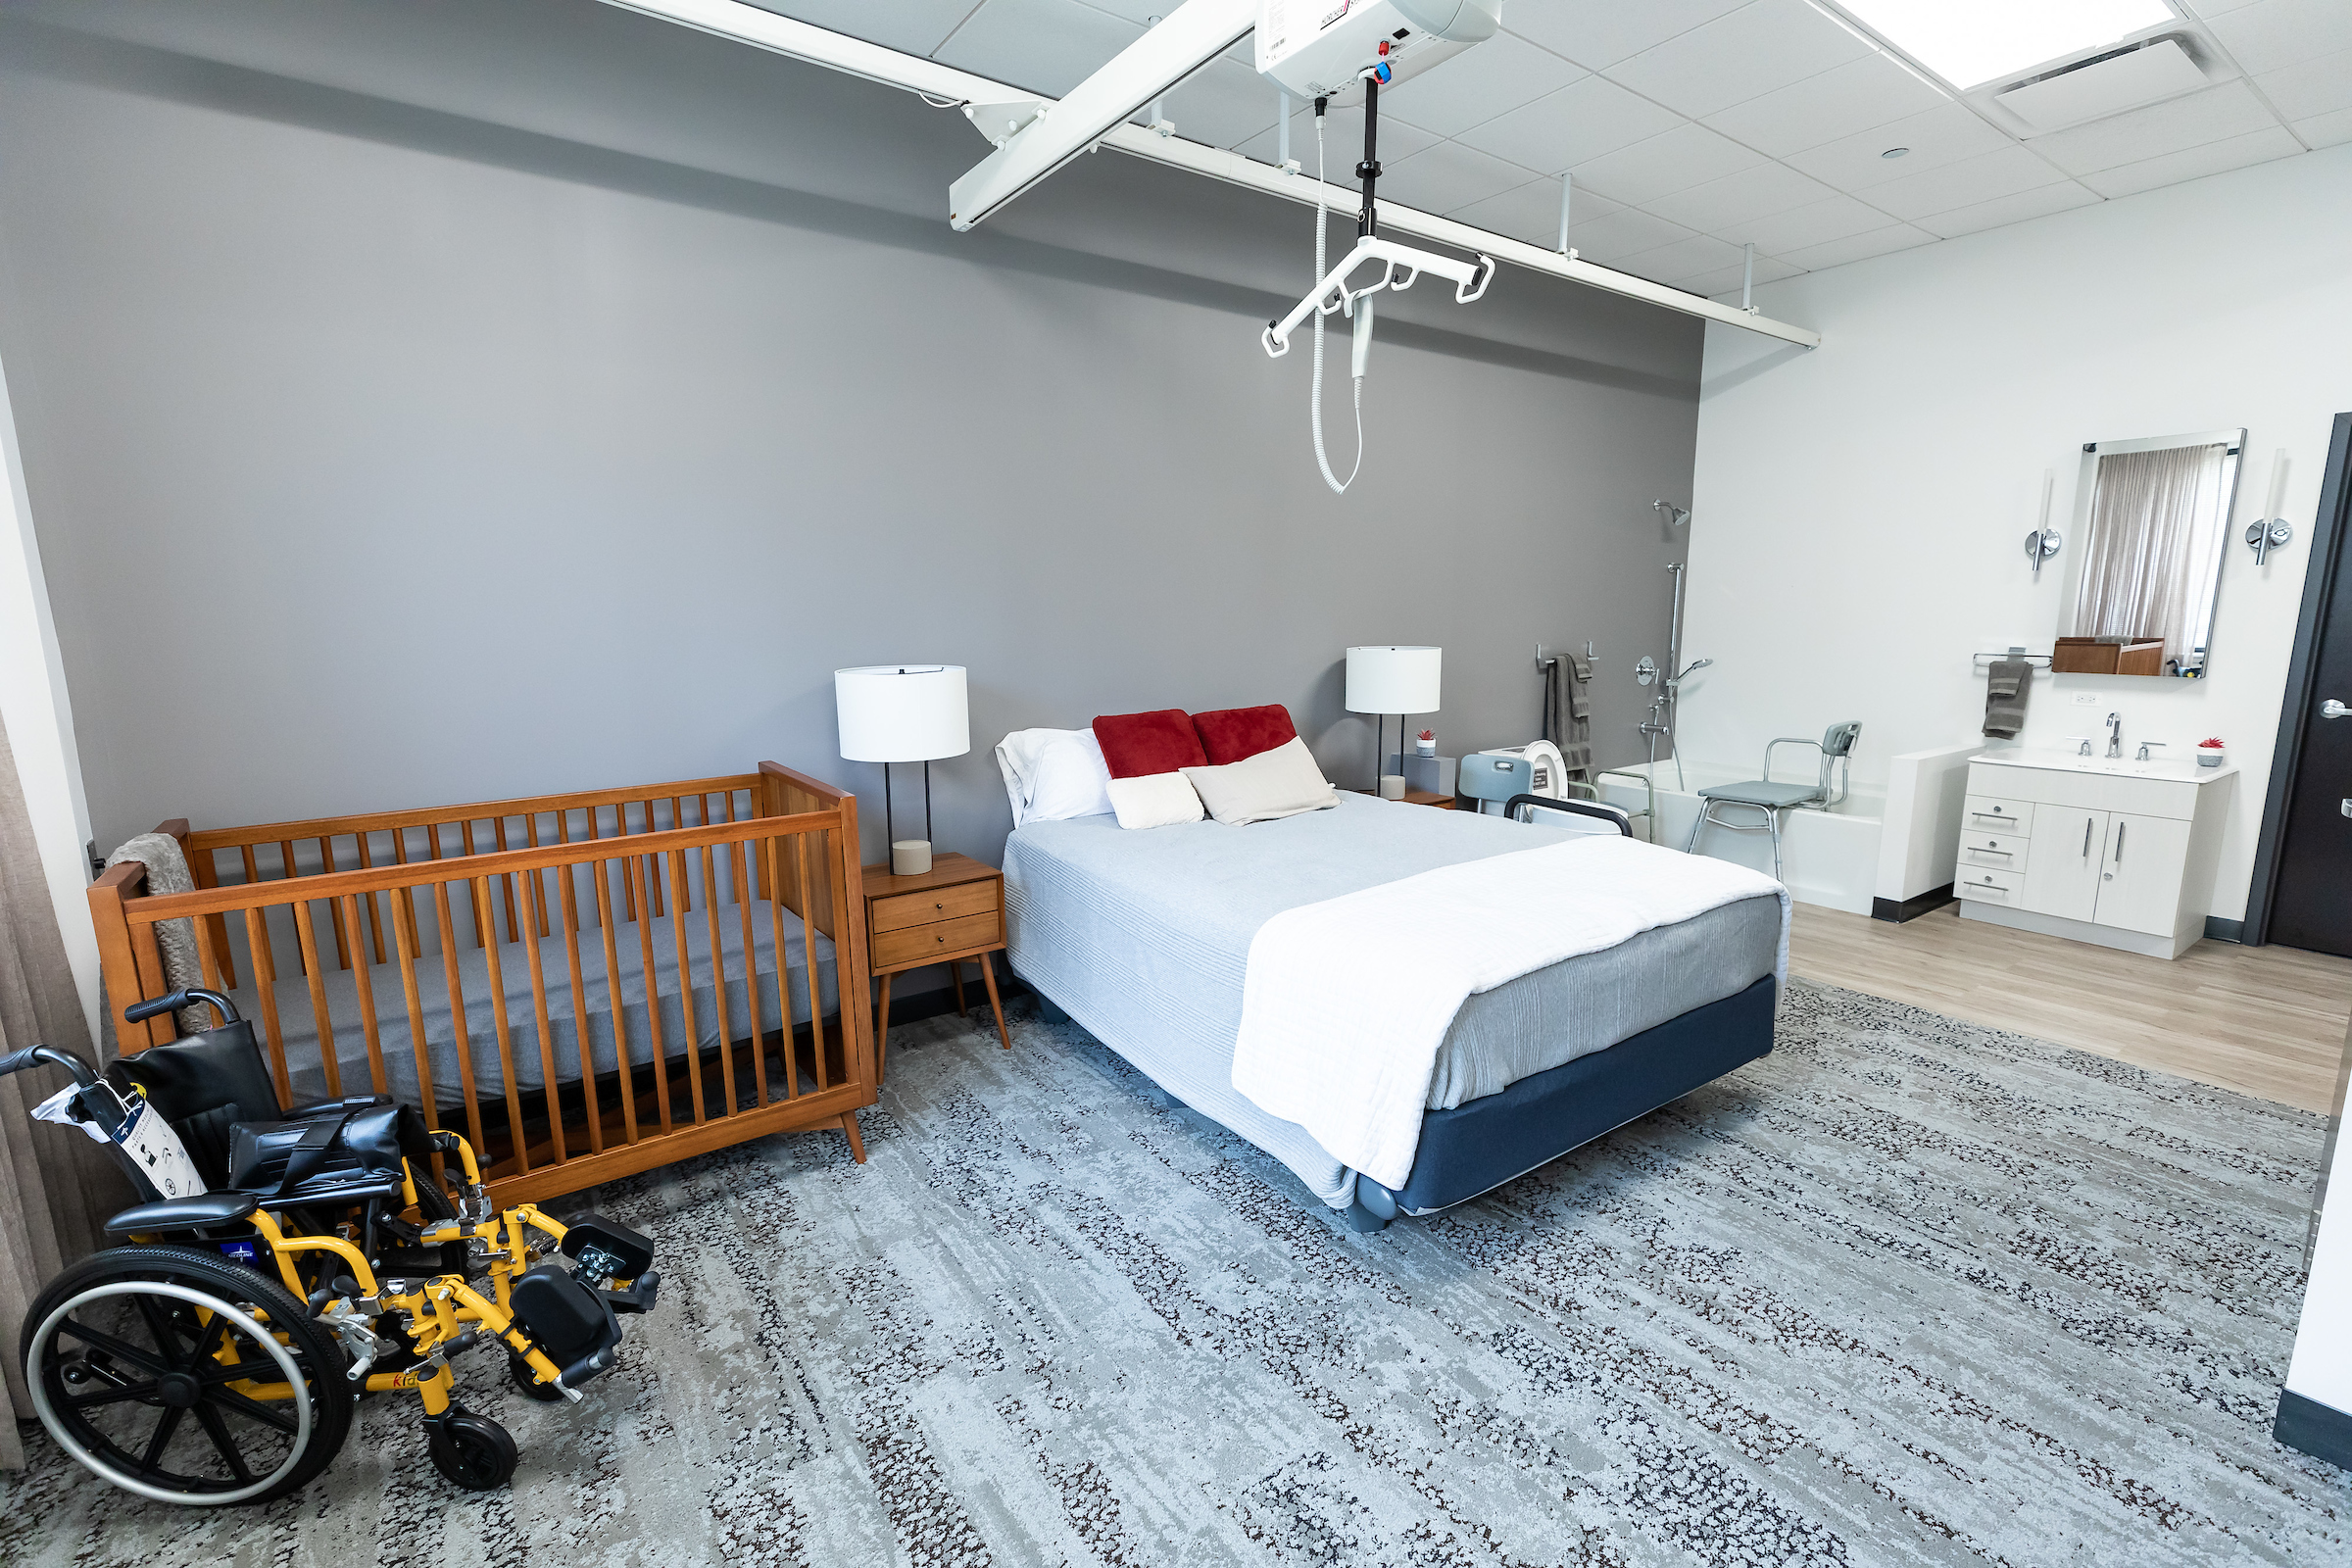 Occupational therapy apartment with bed, wheelchair, crib and bathroom